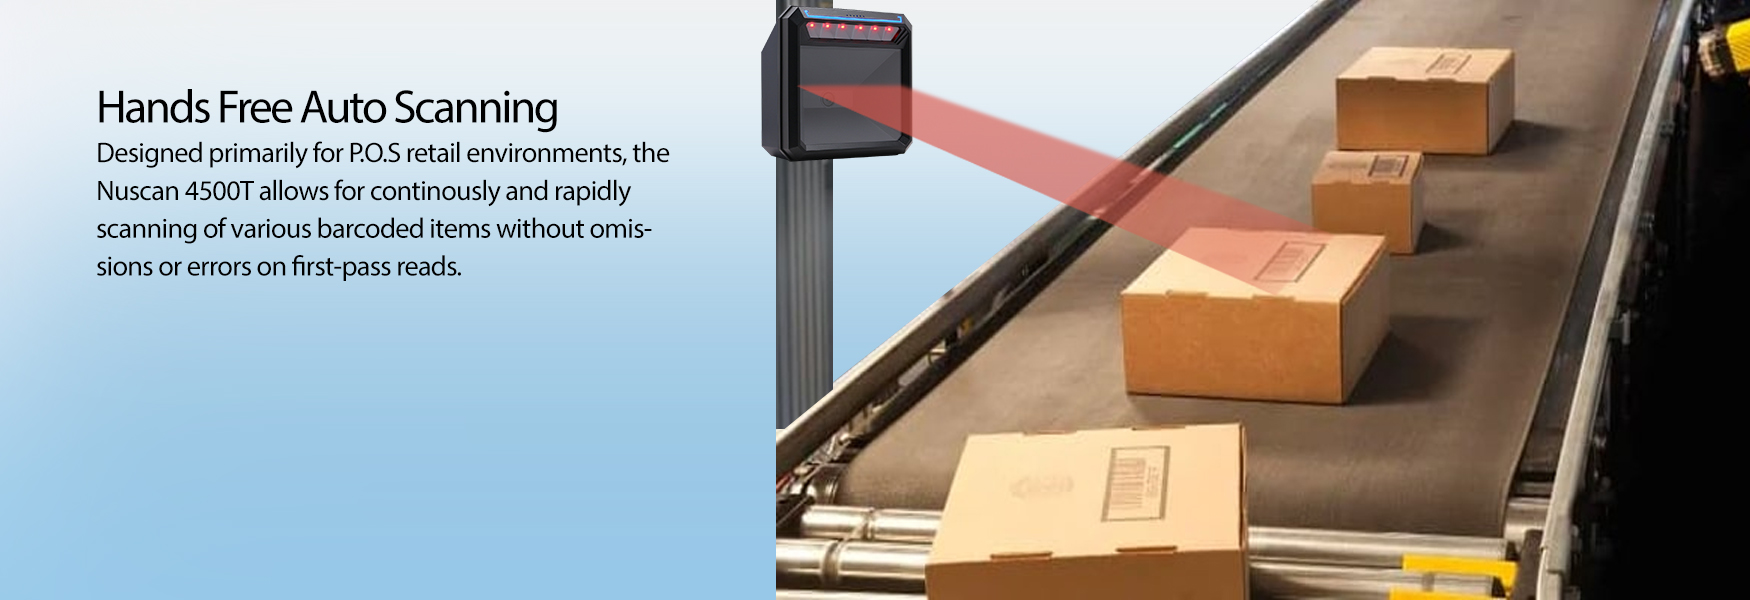  Hands-Free Auto Scanning . Designed primarily for P.O.S retail environments, the Nuscan 4500T allows for continuous and rapid scanning of various barcoded items without omissions or errors on first-pass reads.